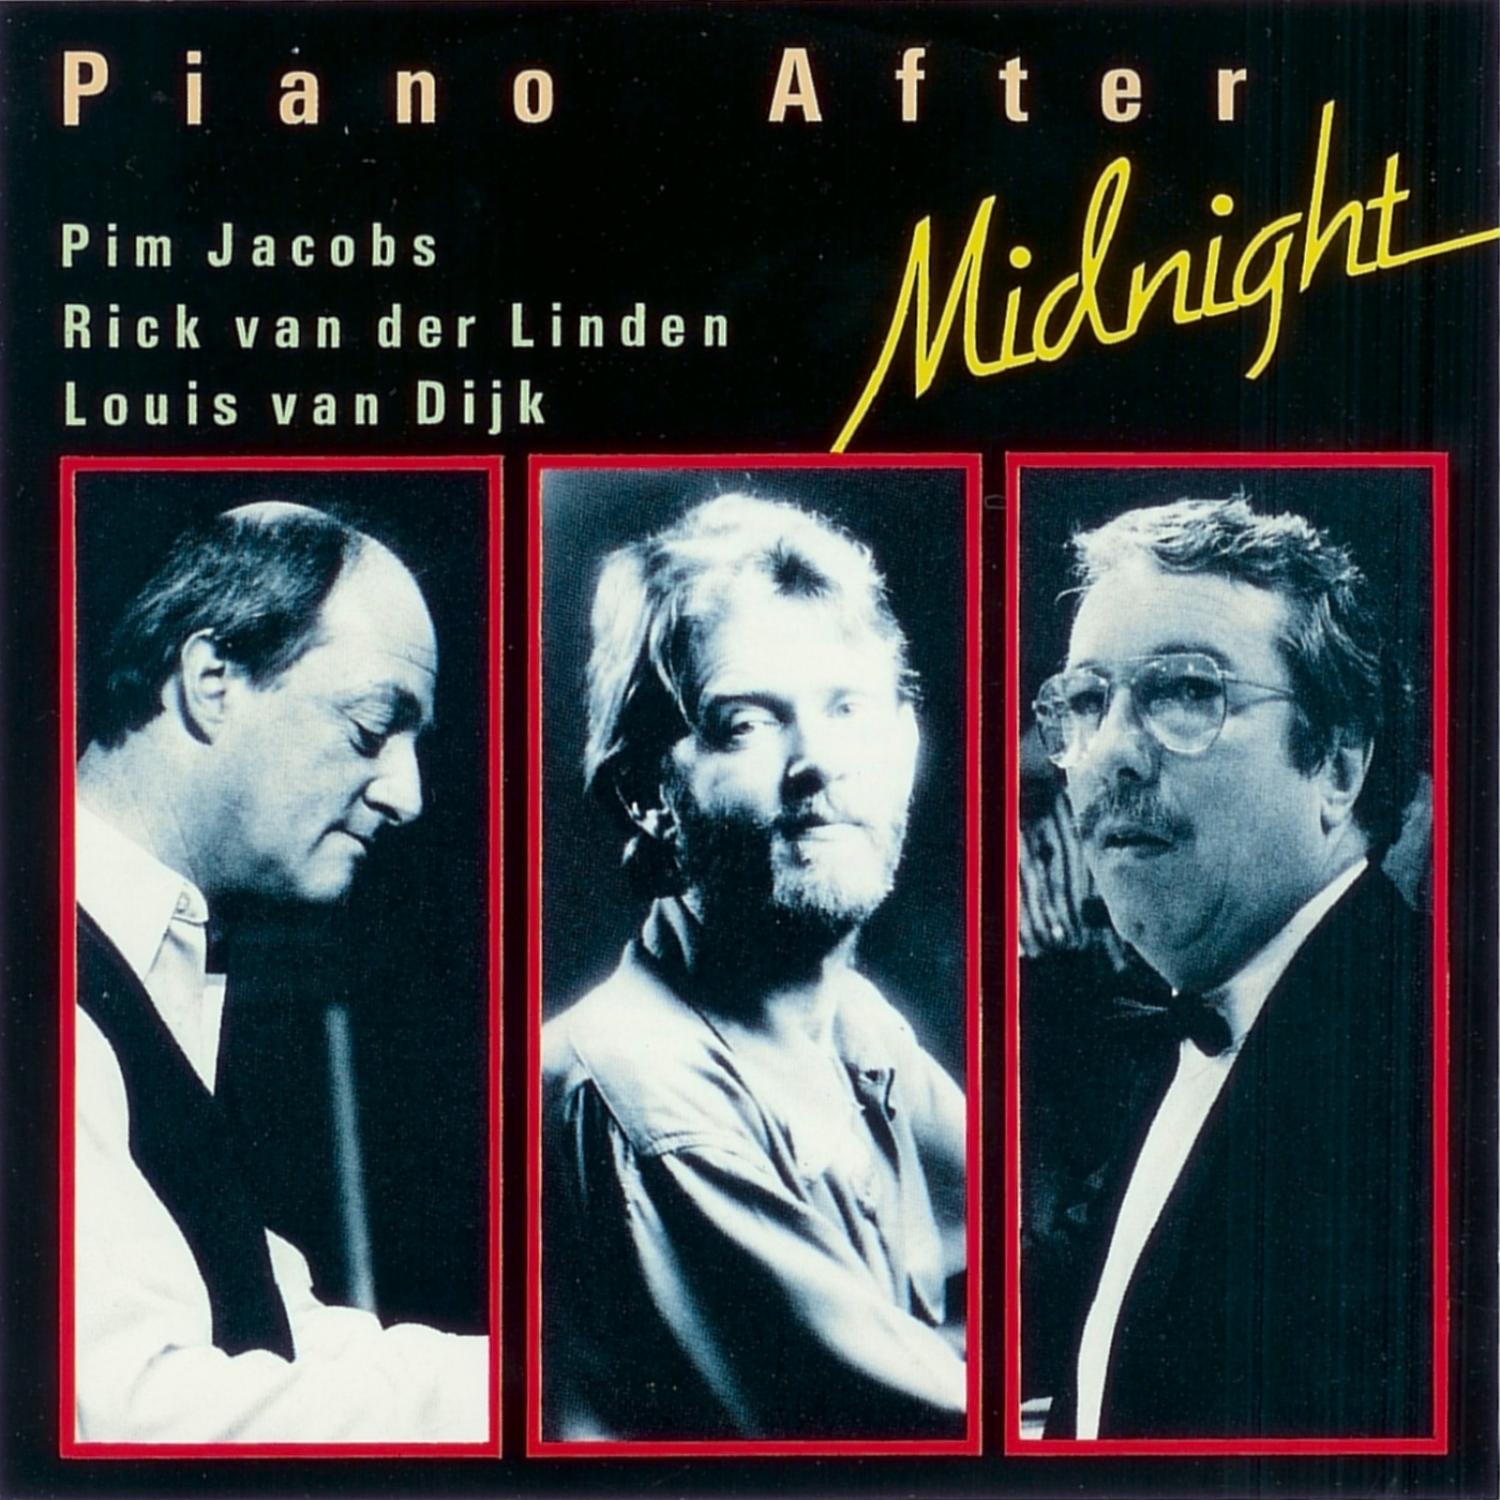 Piano After Midnight